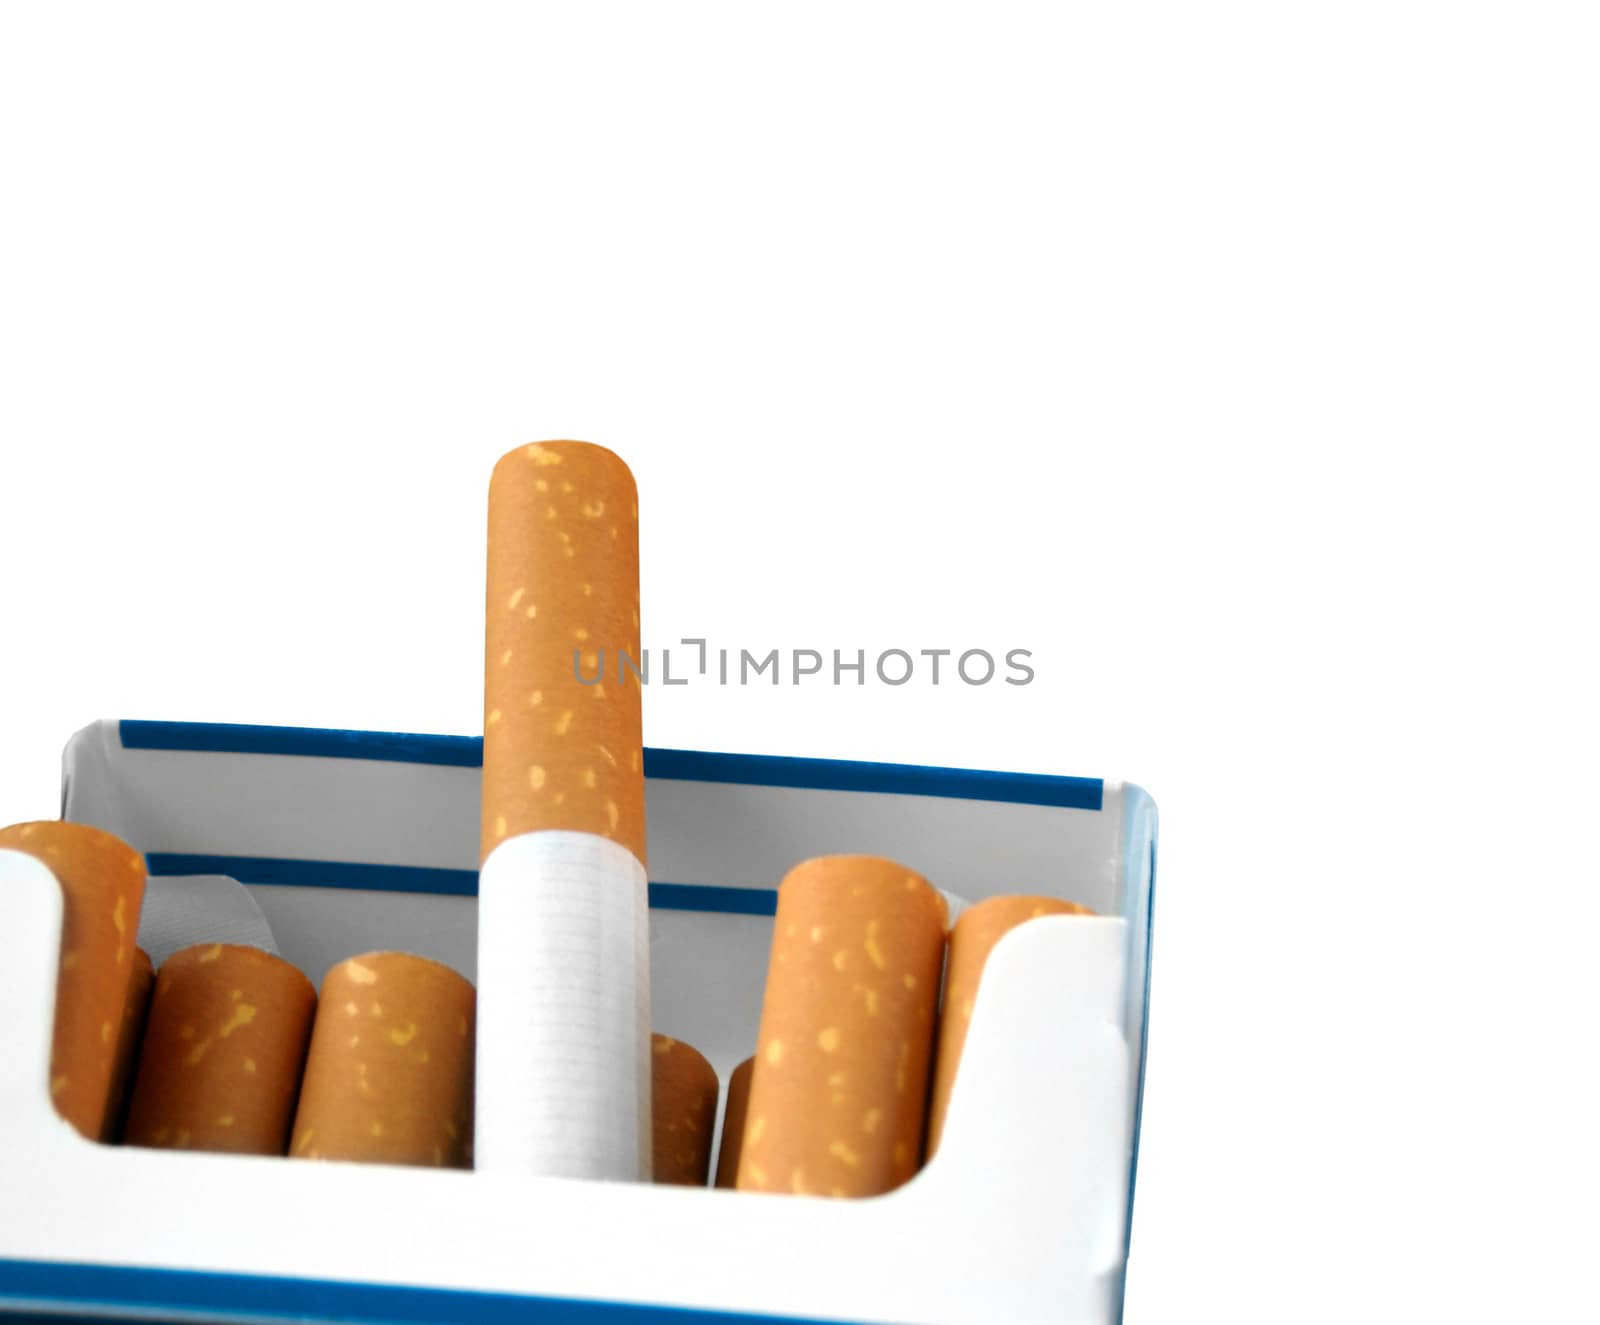 Pack of Cigarettes by shutswis